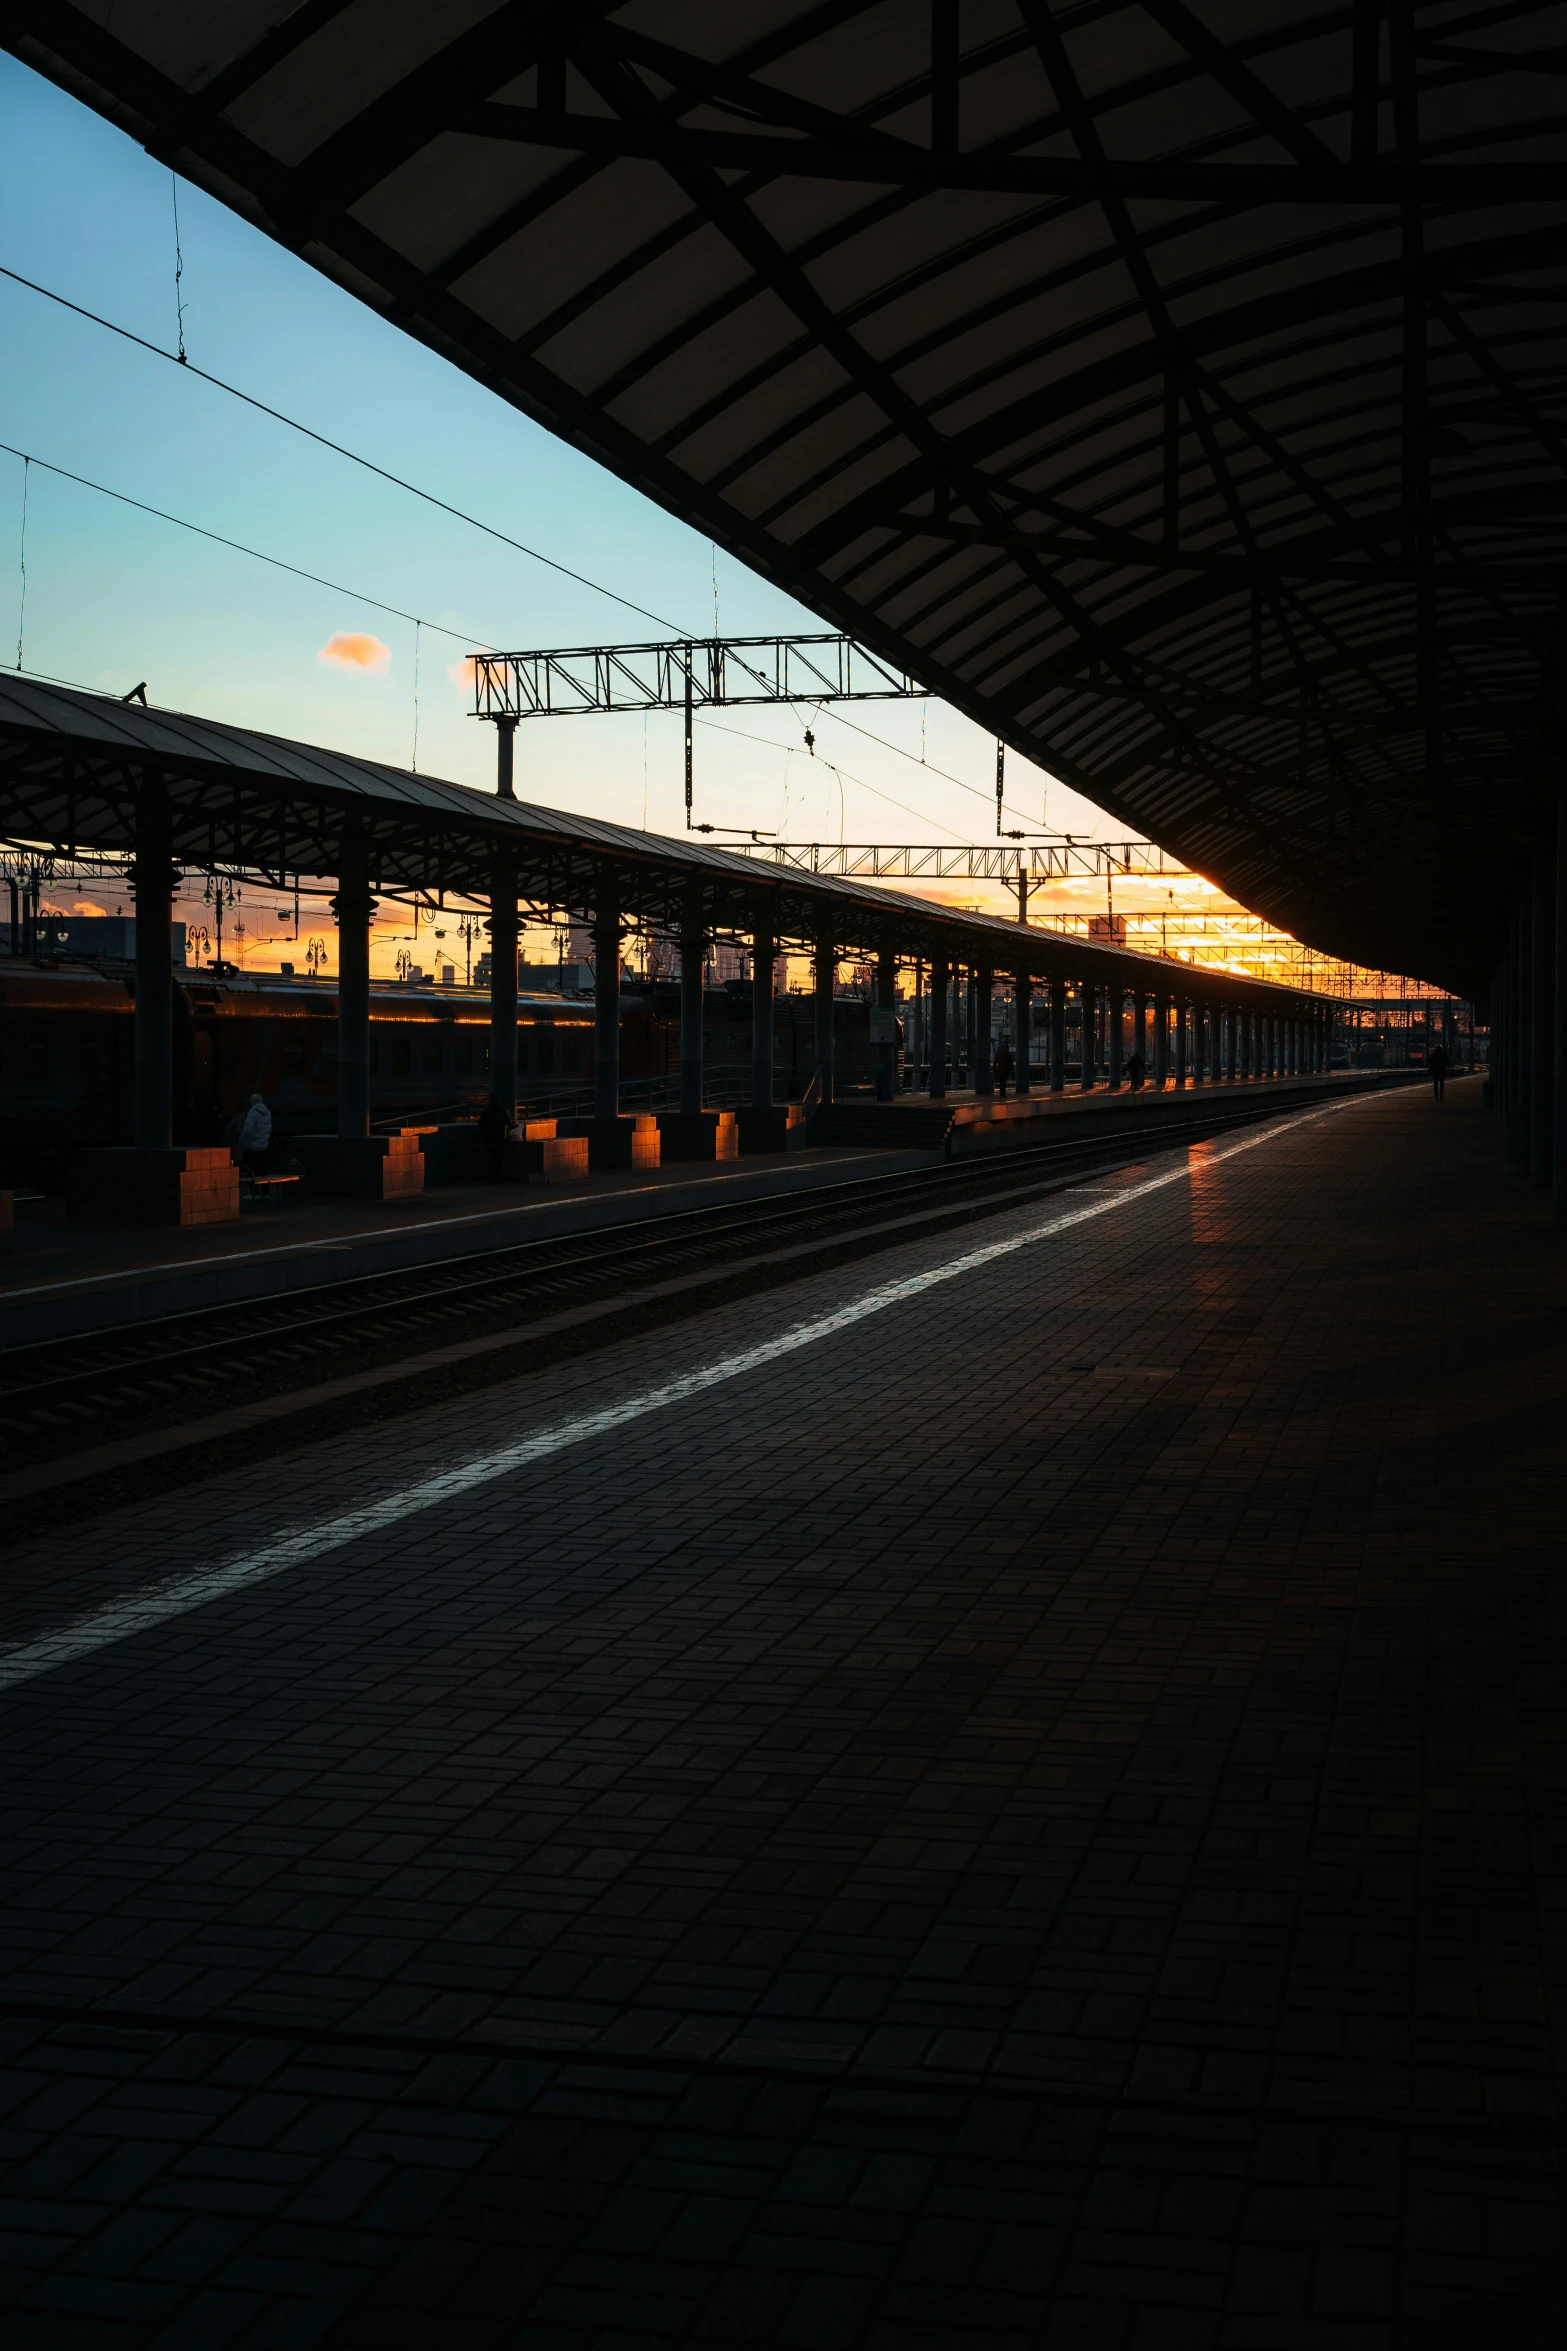 a train stopped at a very train station as the sun sets